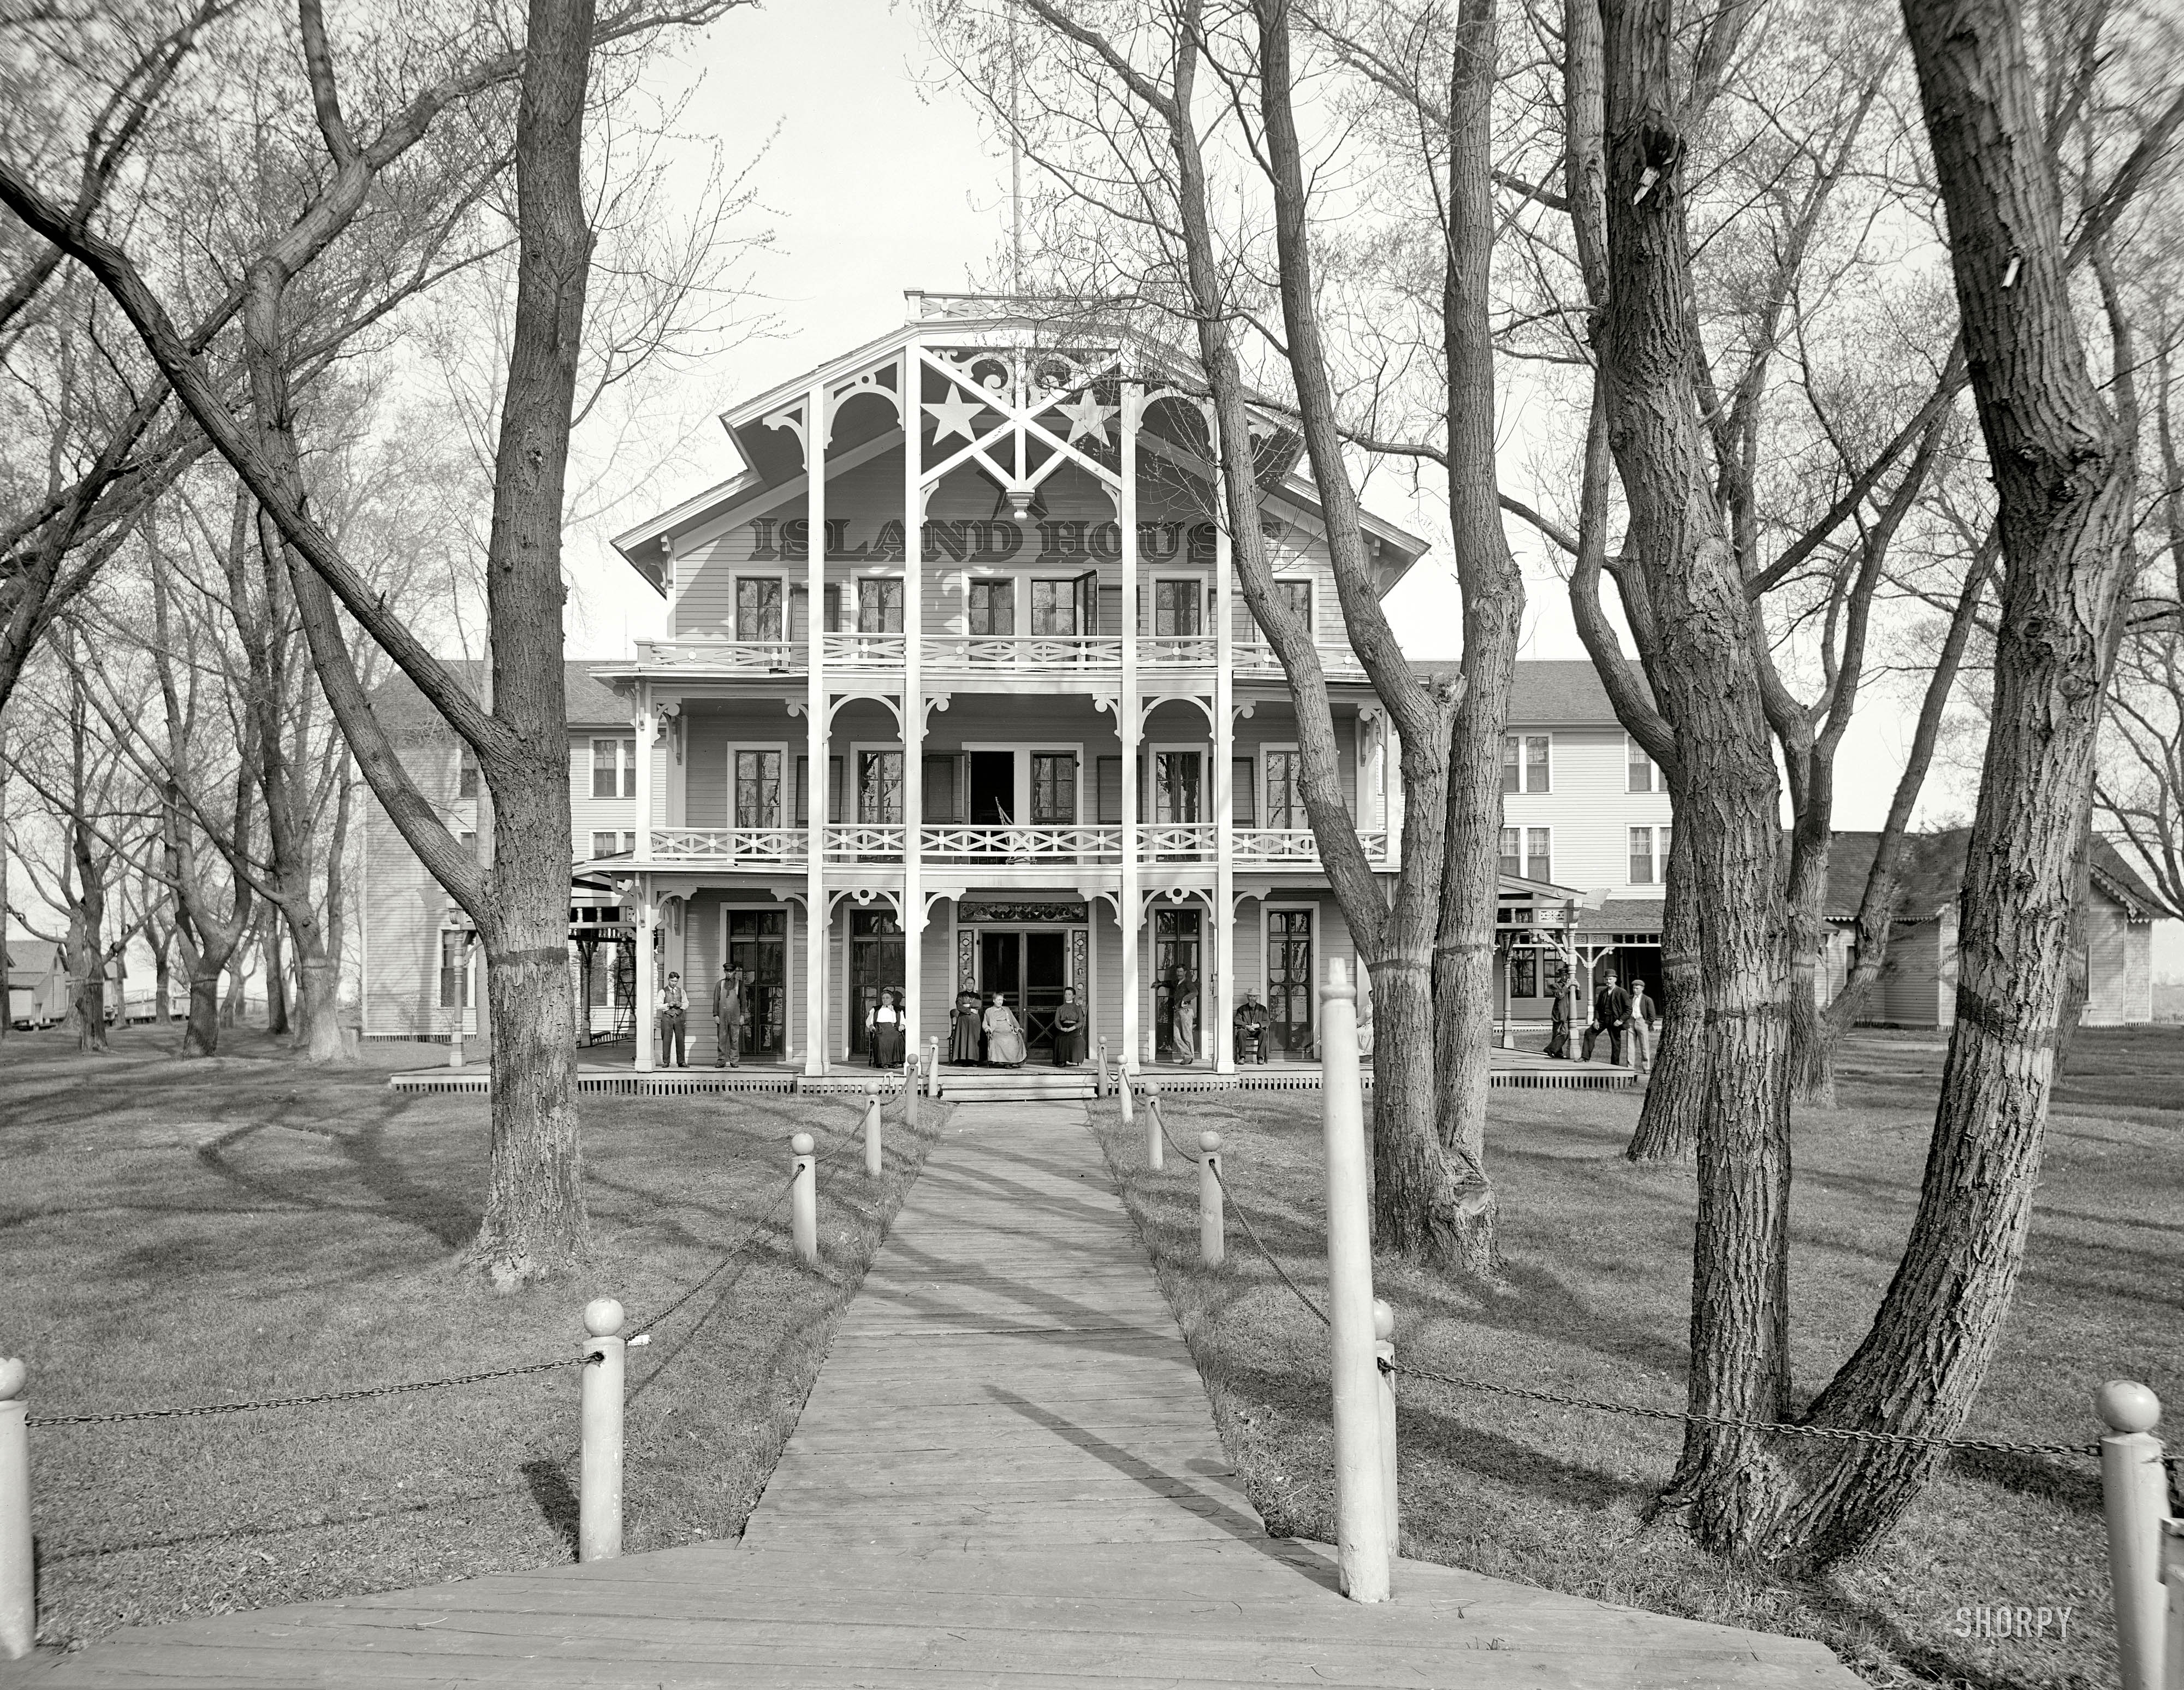 St. Clair Flats, Michigan, circa 1910. "Star Island House." A hotel on the St. Clair River whose scenic arboreal allée, Willow Avenue, we saw last week. 8x10 inch dry plate glass negative, Detroit Publishing Company. View full size.